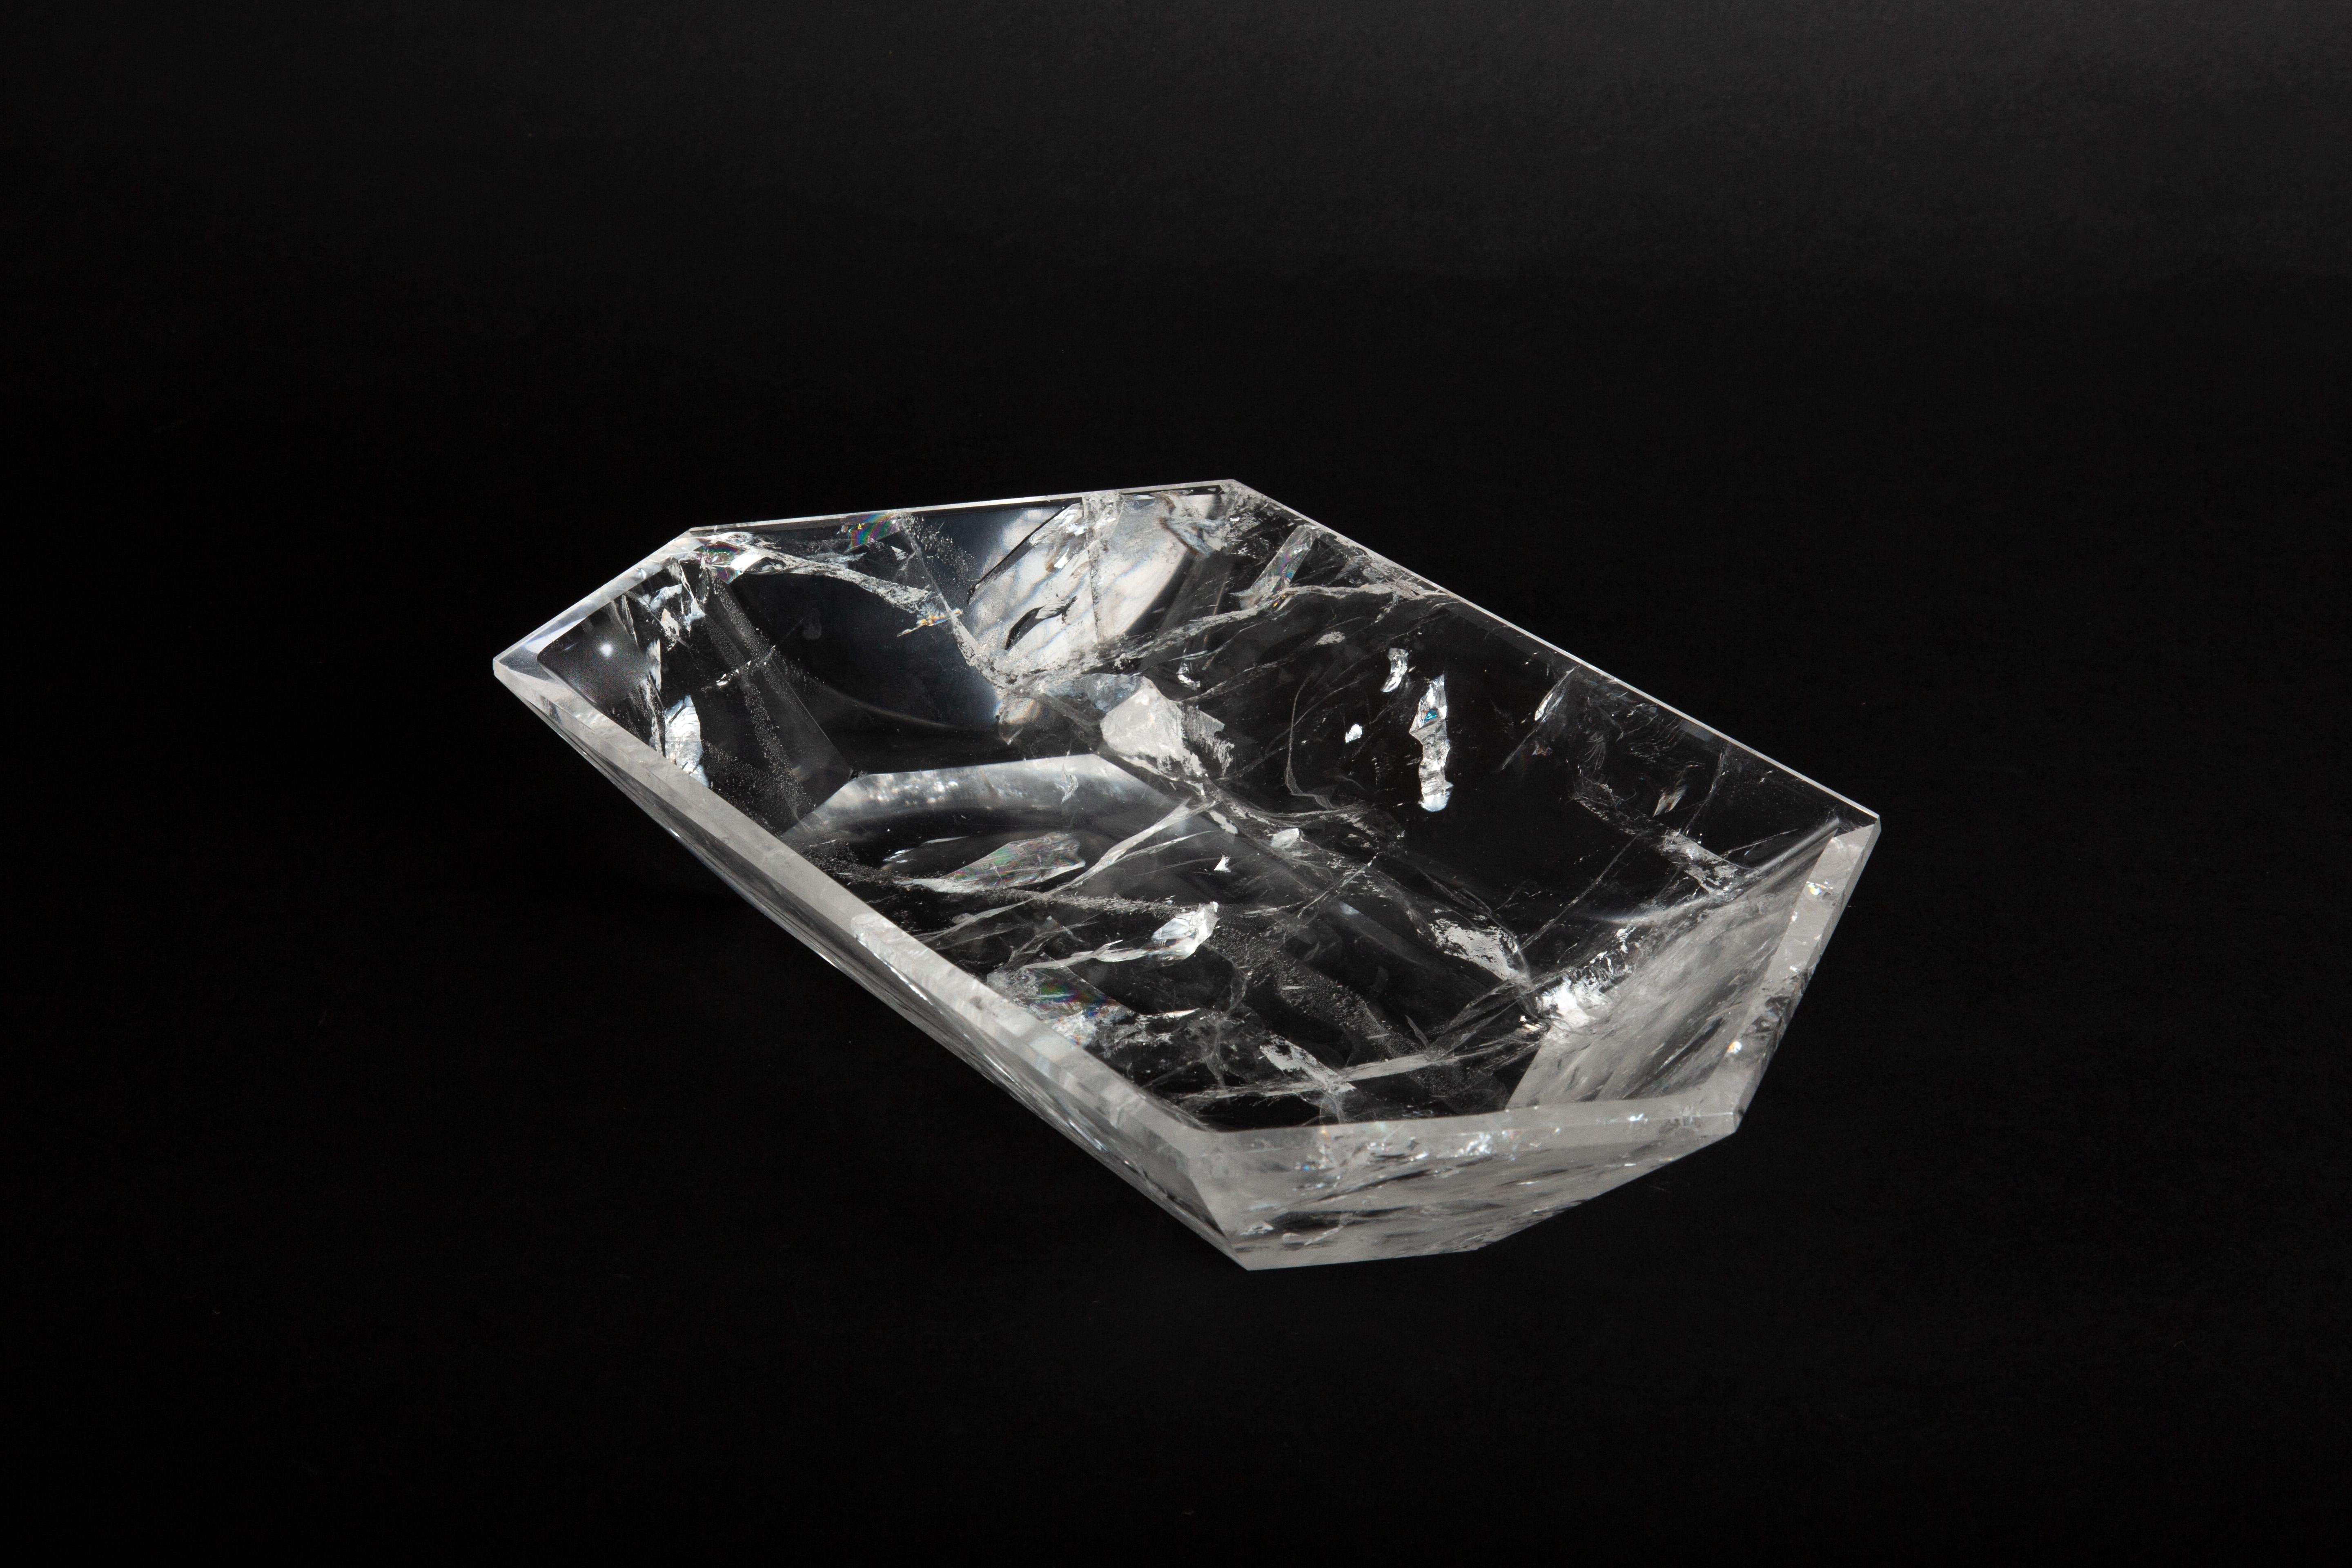 This Rock Crystal Faceted Vide-Poche is a masterpiece of elegance and purity, capturing the natural beauty and sophistication of rock crystal in a functional art piece. Expertly carved and polished to highlight its clarity and lustrous facets, this